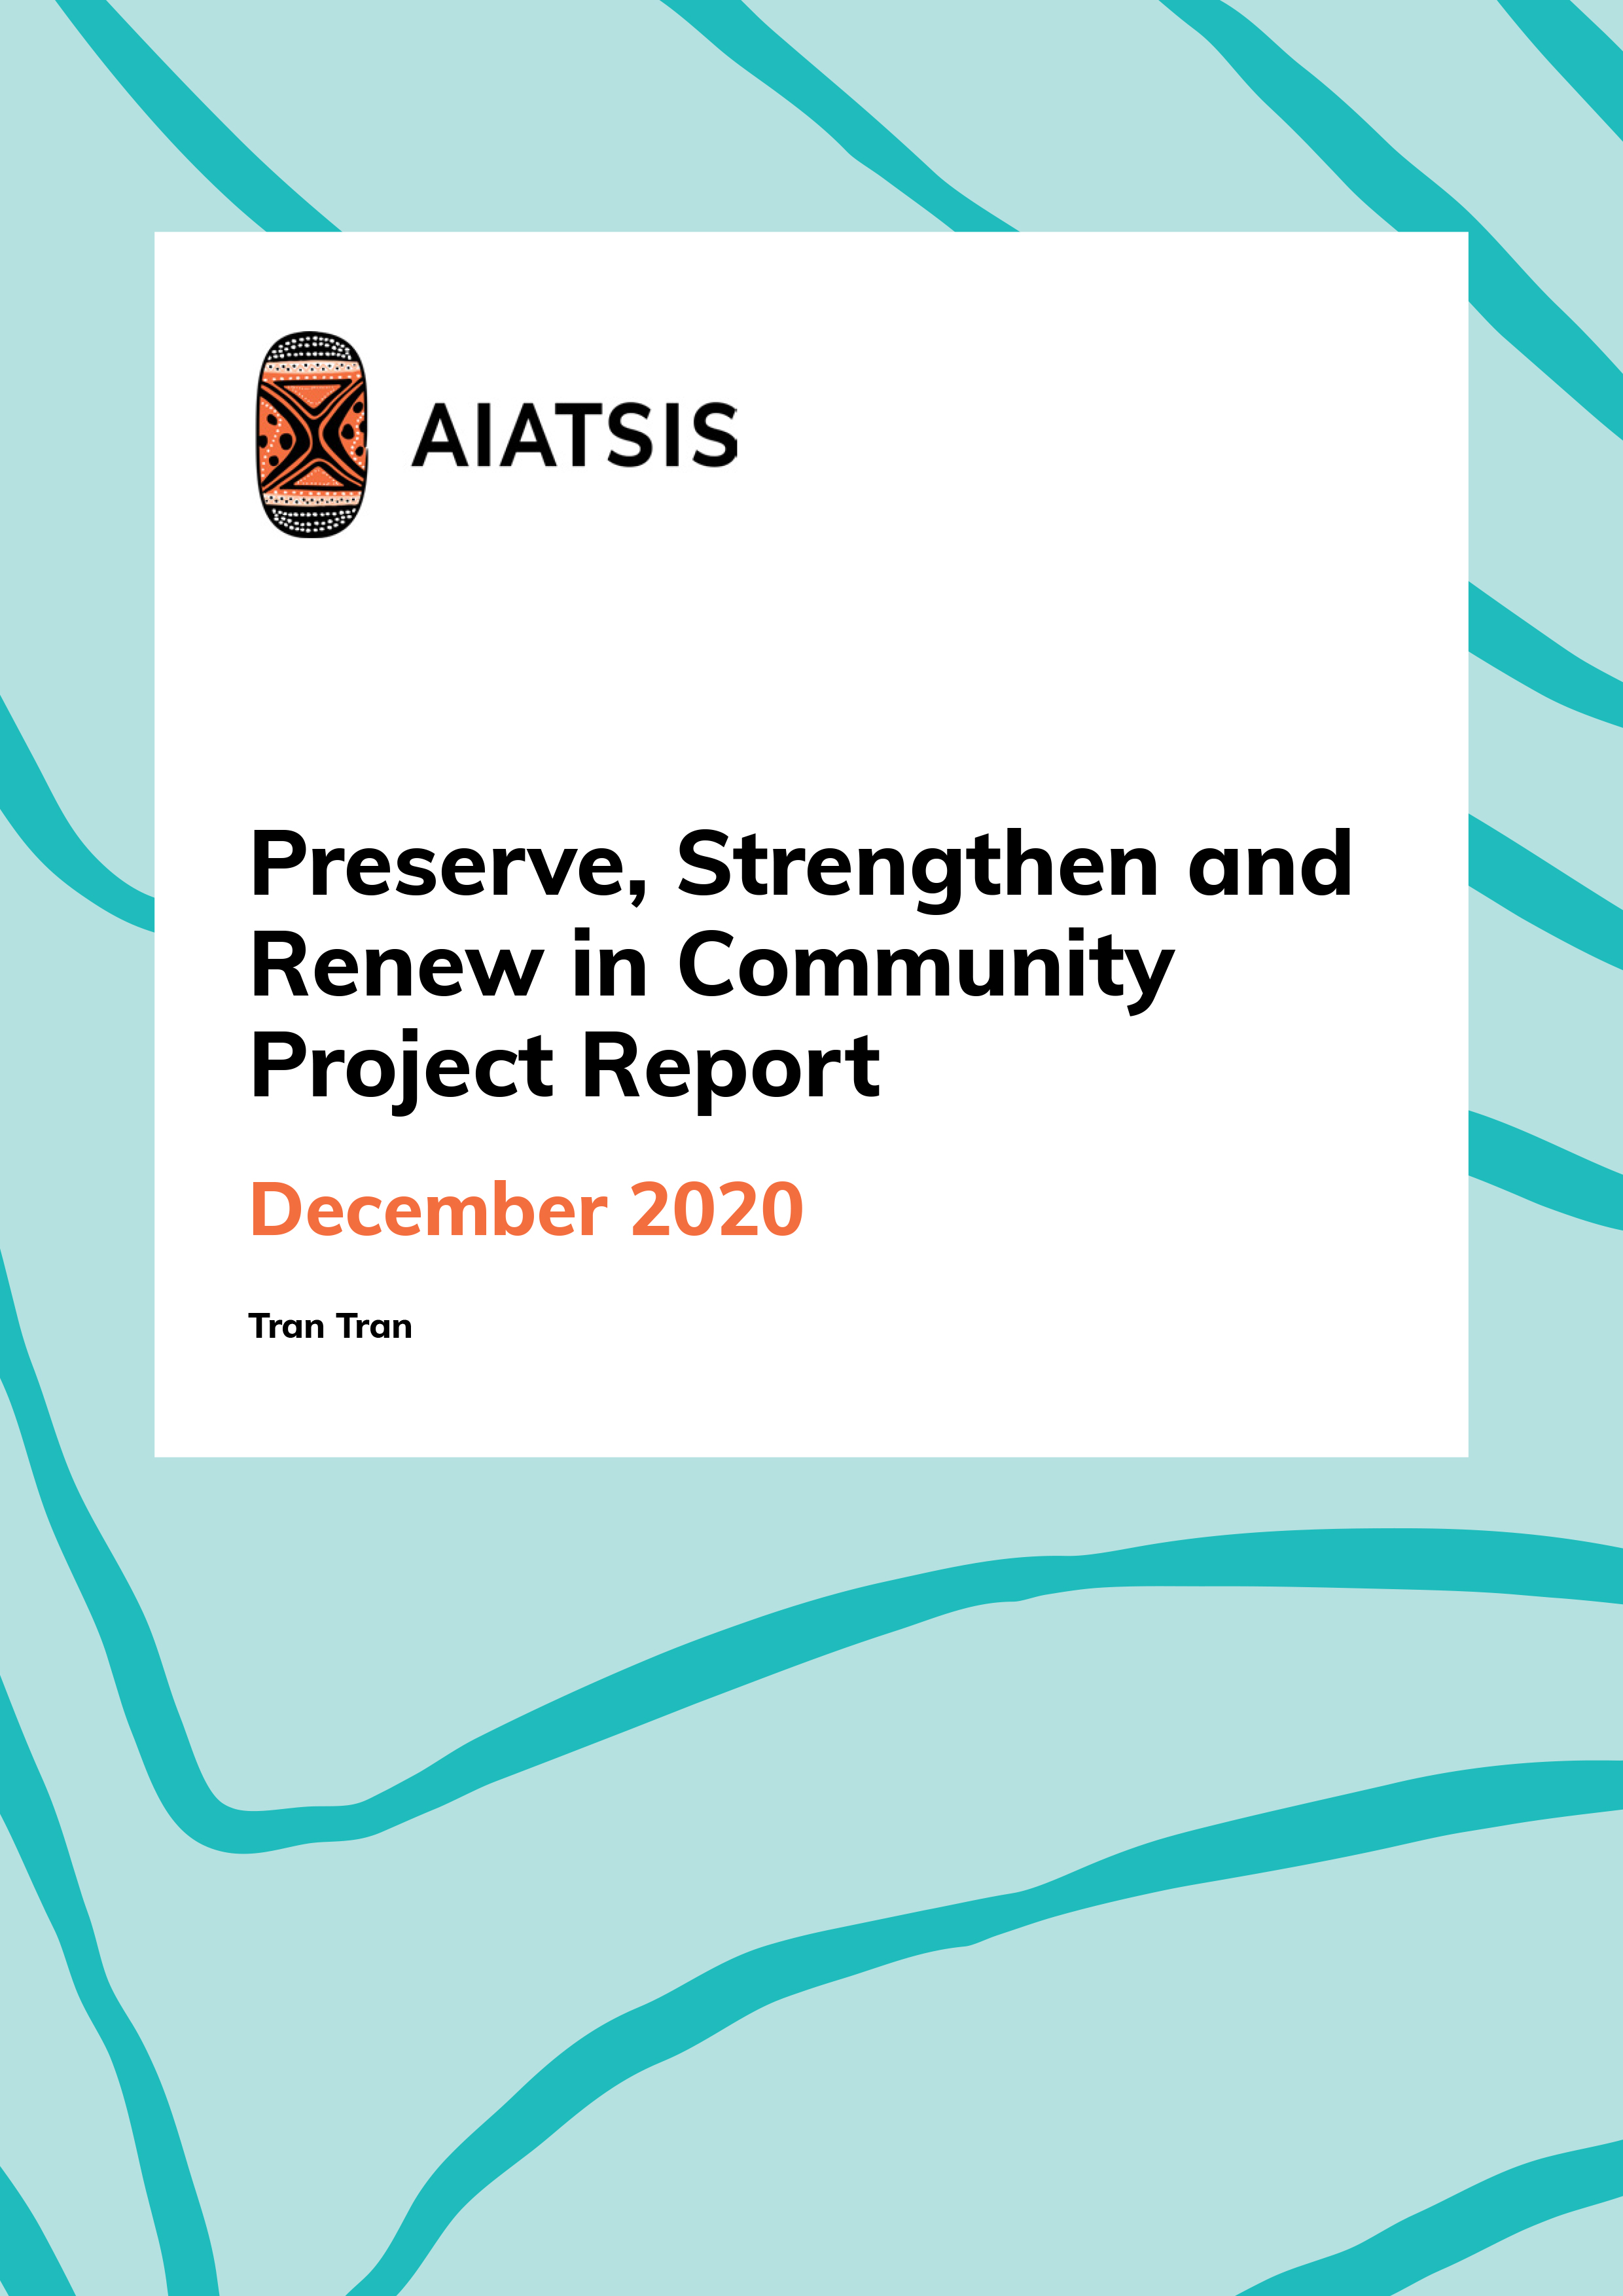 Preserve, Strengthen and Renew in Community - Project Report